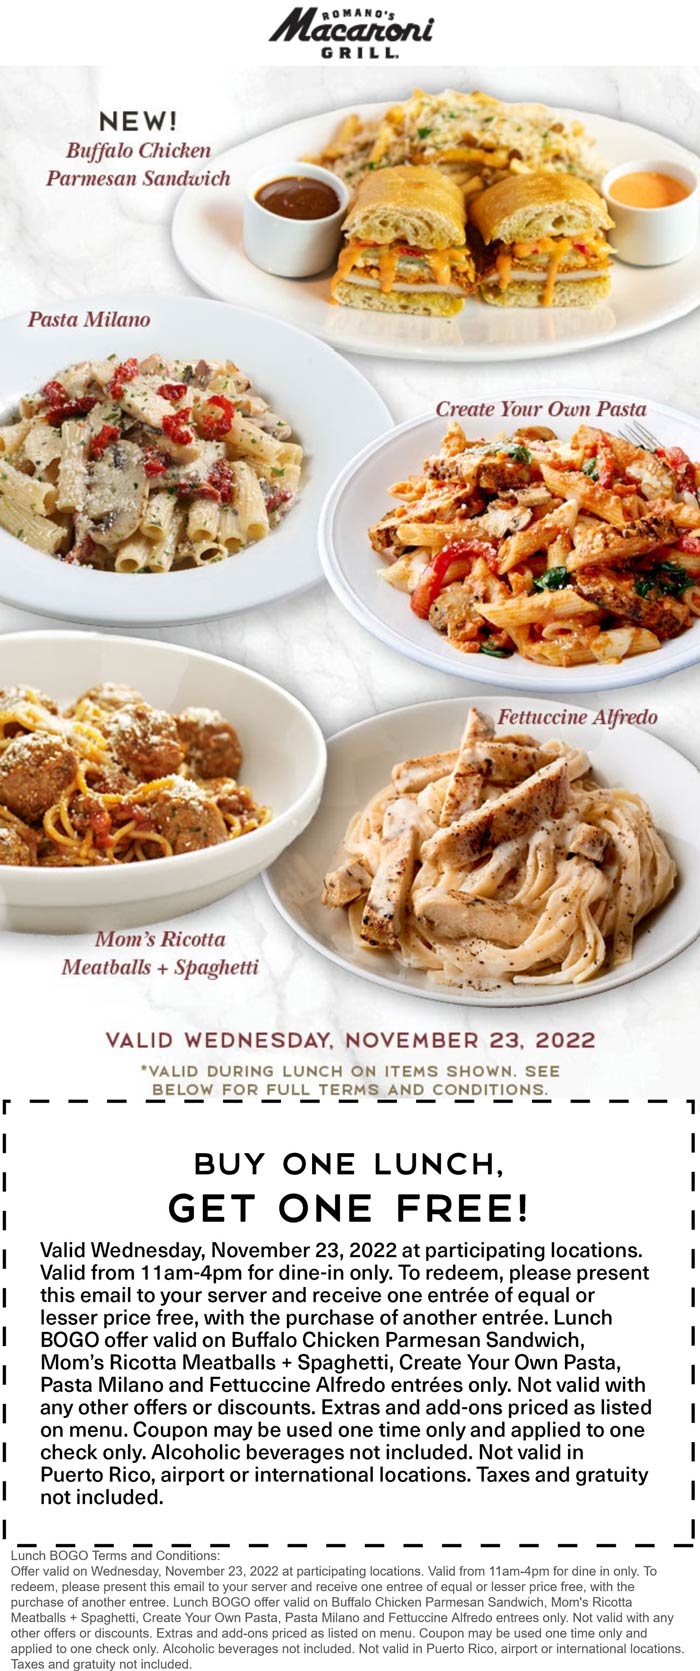 Macaroni Grill restaurants Coupon  Second lunch free today at Macaroni Grill #macaronigrill 